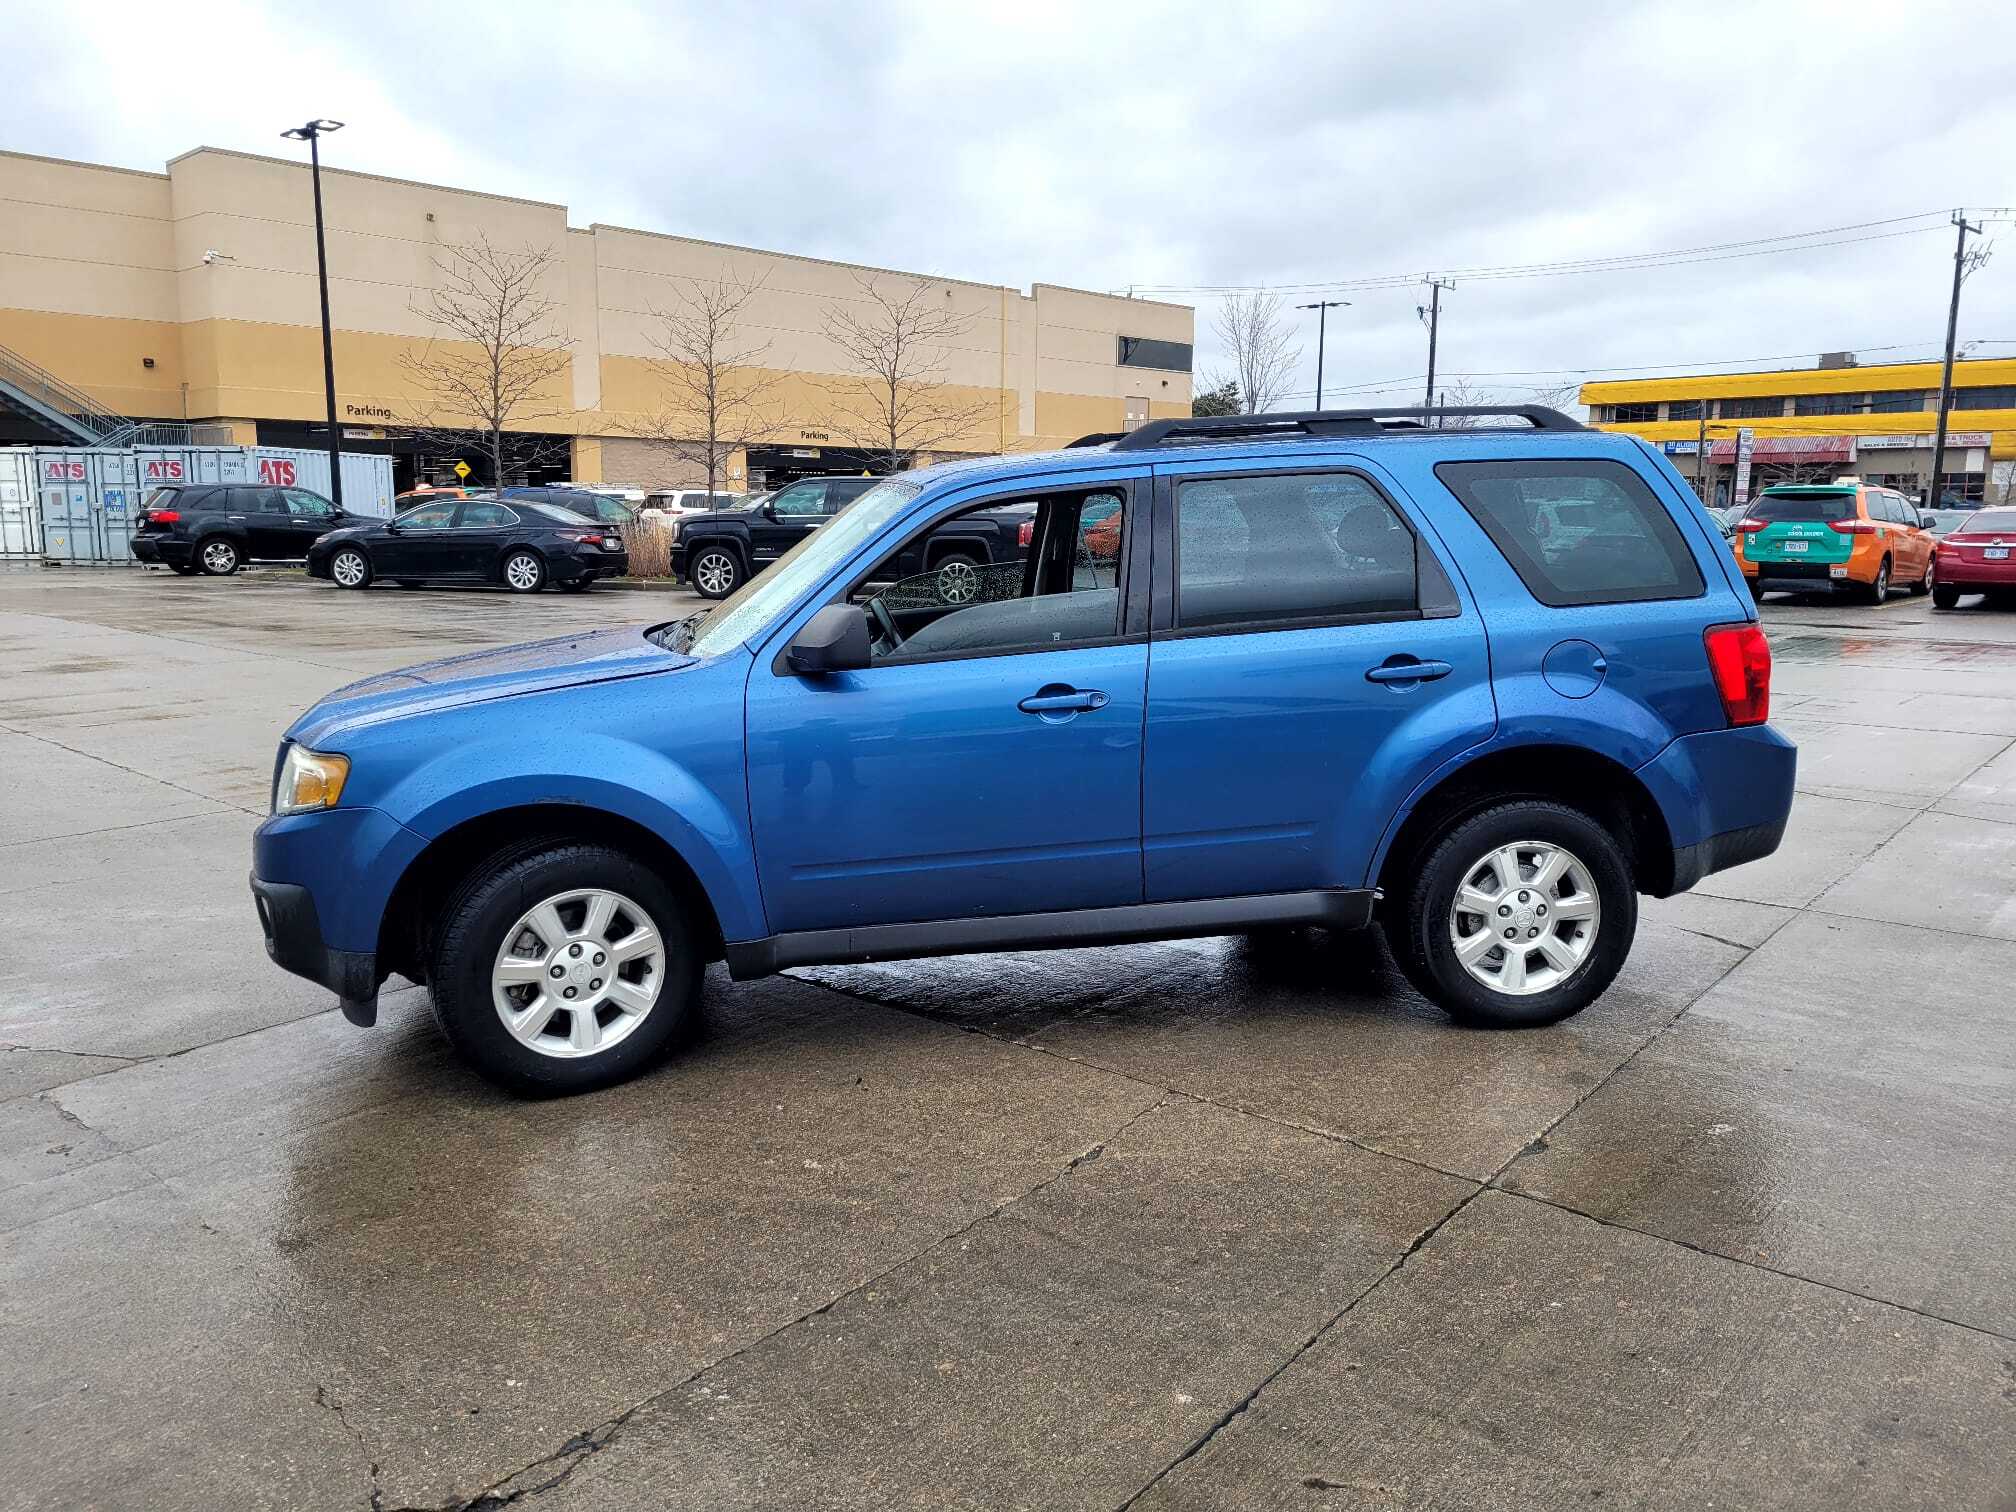 2009 Mazda Tribute AWD, 4 door, Automatic, 3 Years warranty available